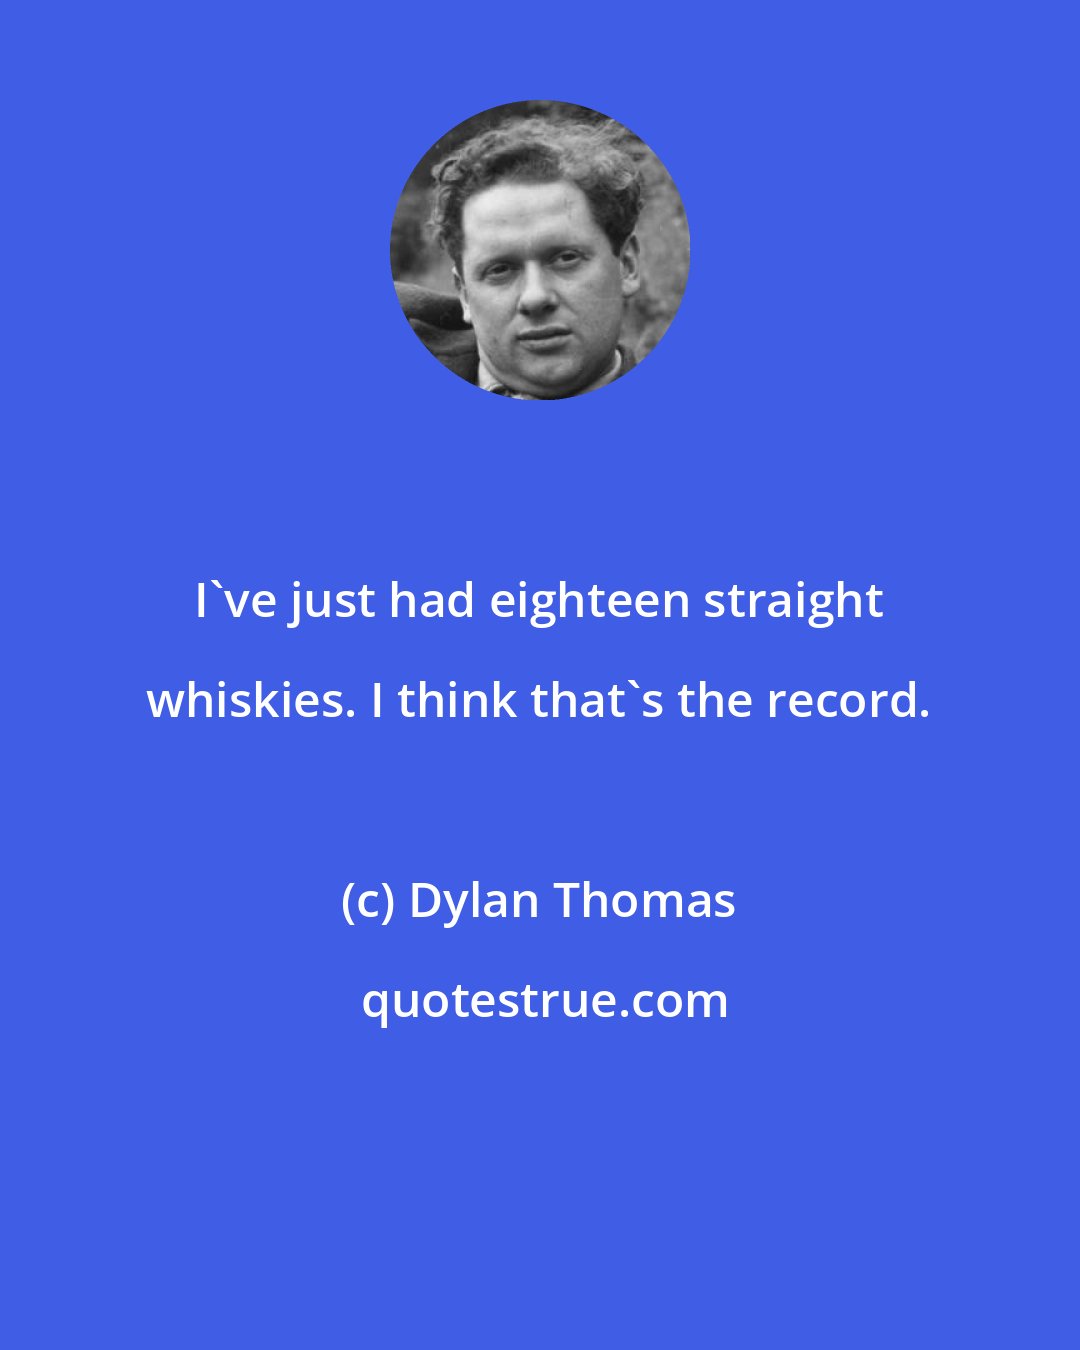 Dylan Thomas: I've just had eighteen straight whiskies. I think that's the record.